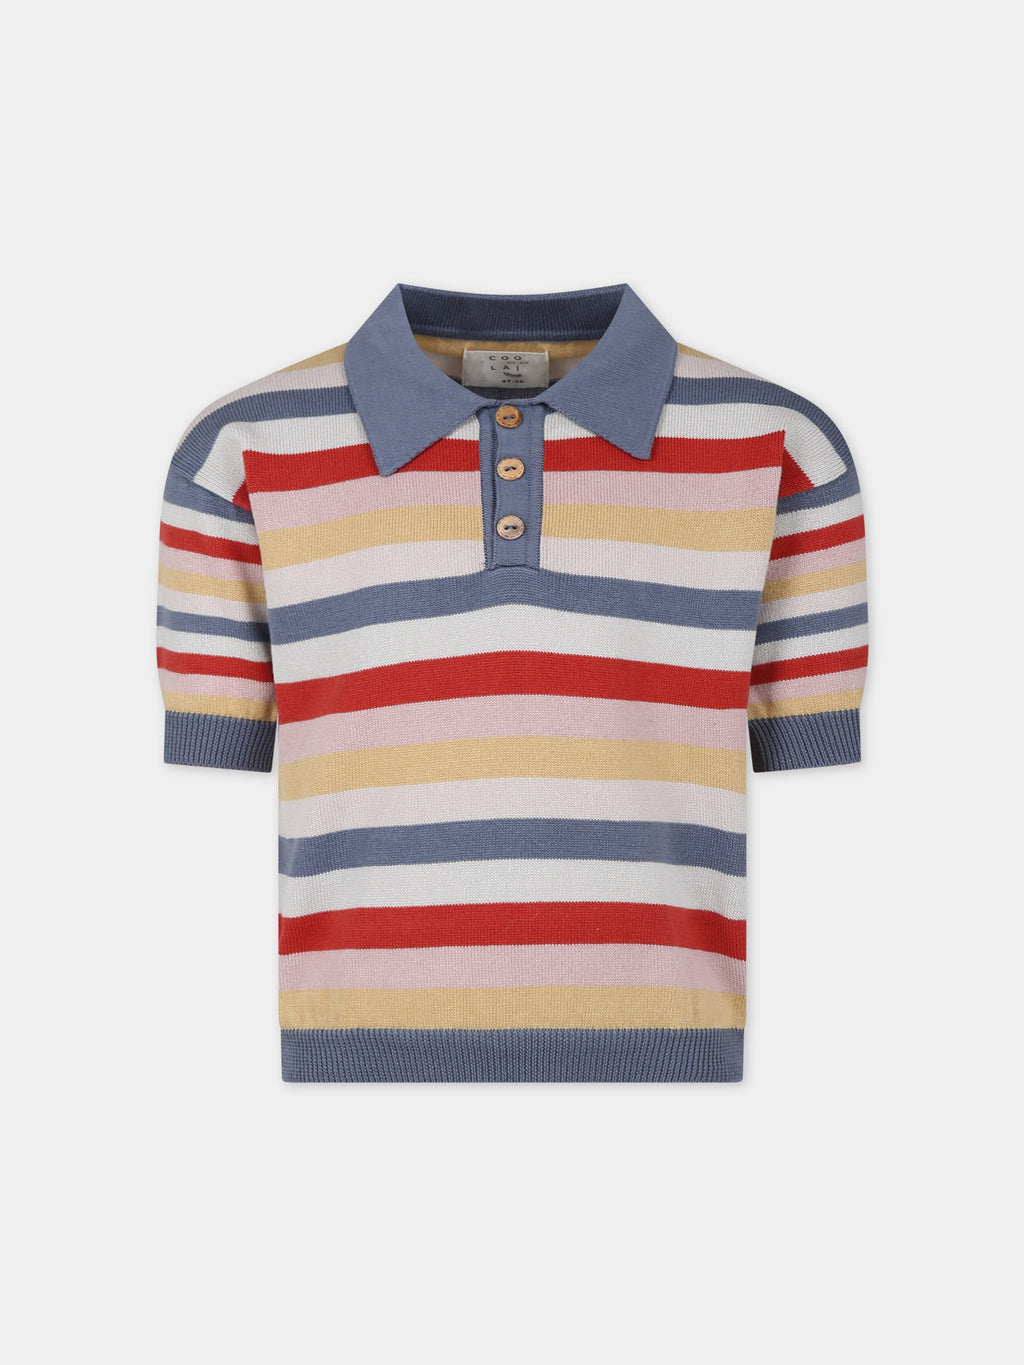 Multicolor polo shirt for kids with striped pattern